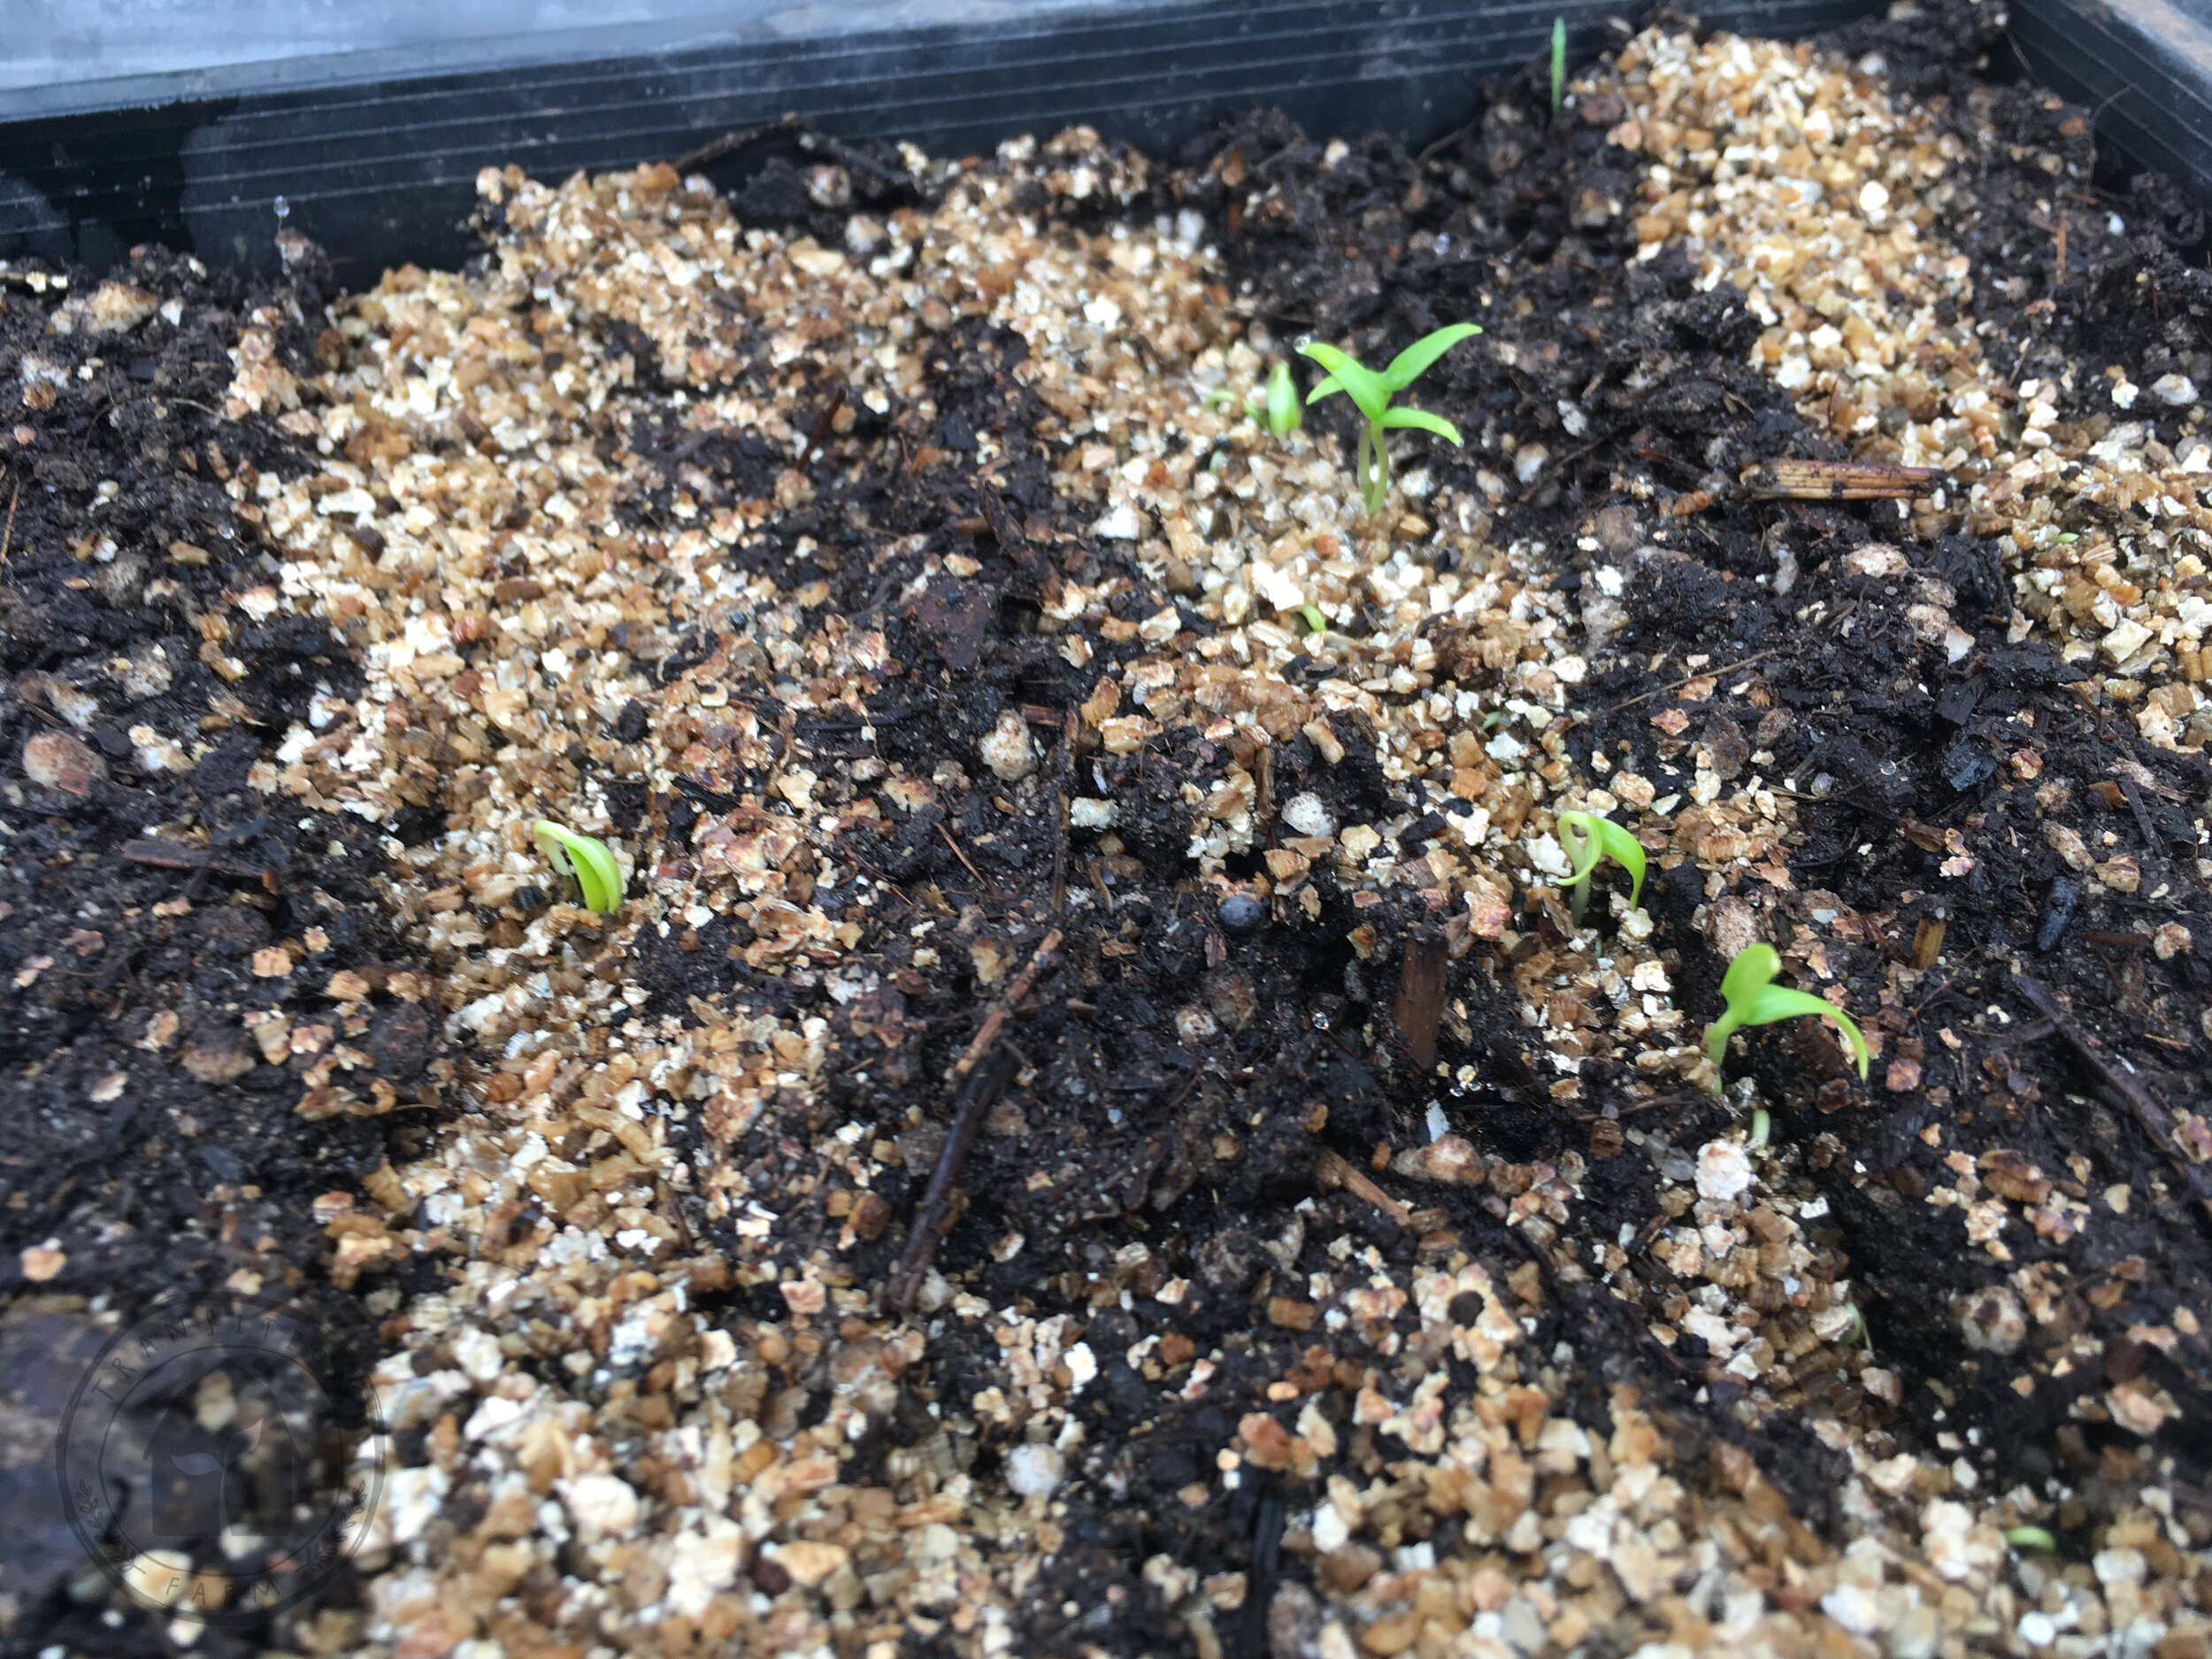   AIR CIRCULATION - Once seeds have germinated, begin opening the vents on the plastic dome. Begin to toughen your seedlings a bit more everyday until you remove the dome completely!  